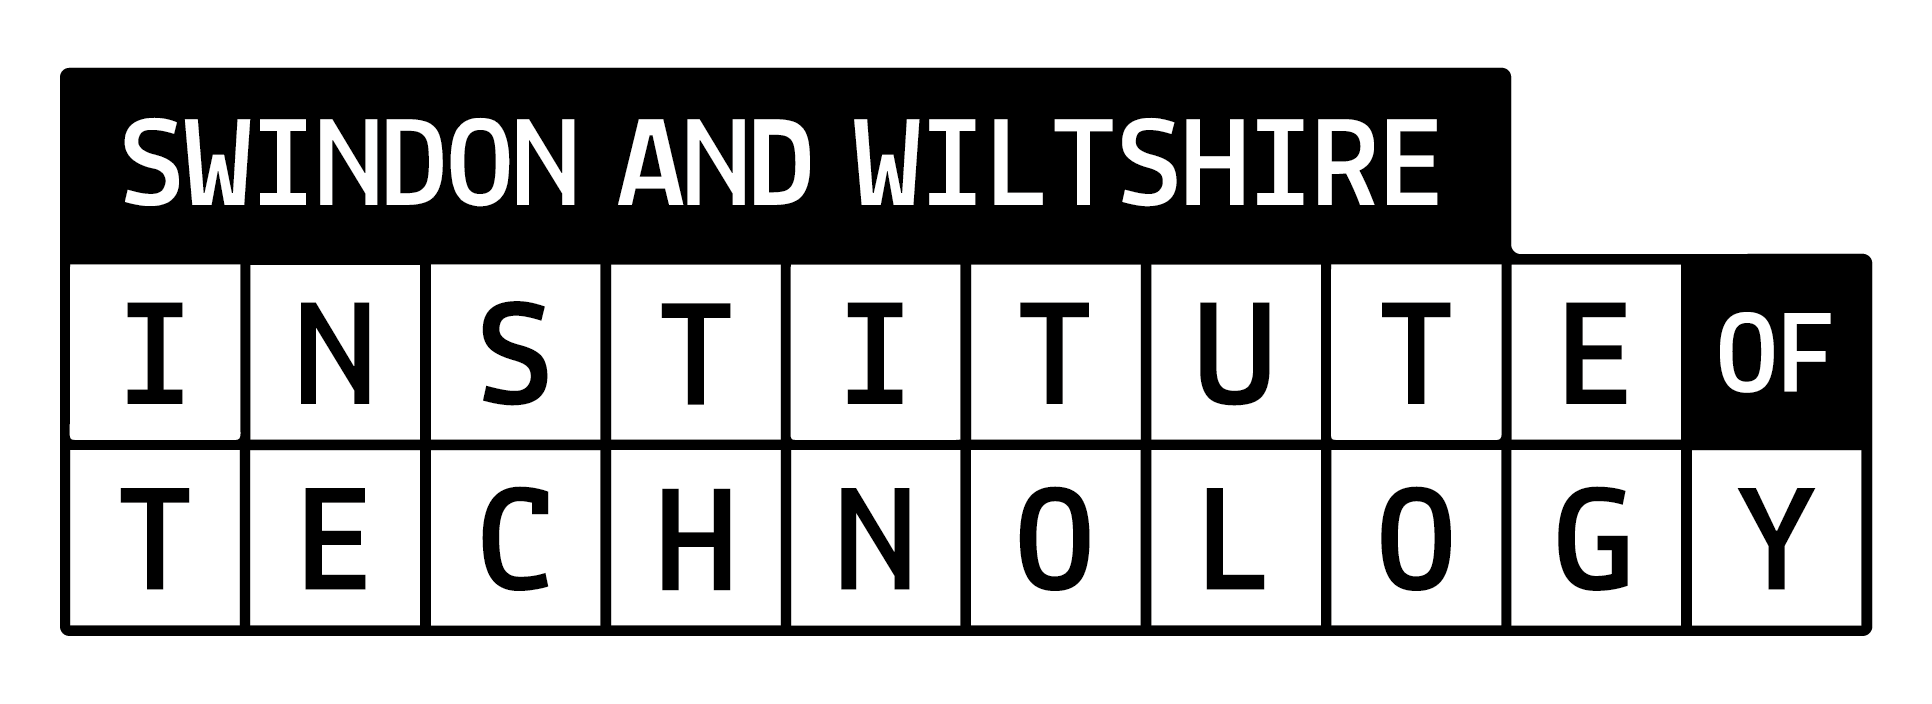 Swindon and Wiltshire Institute of Technology Logo